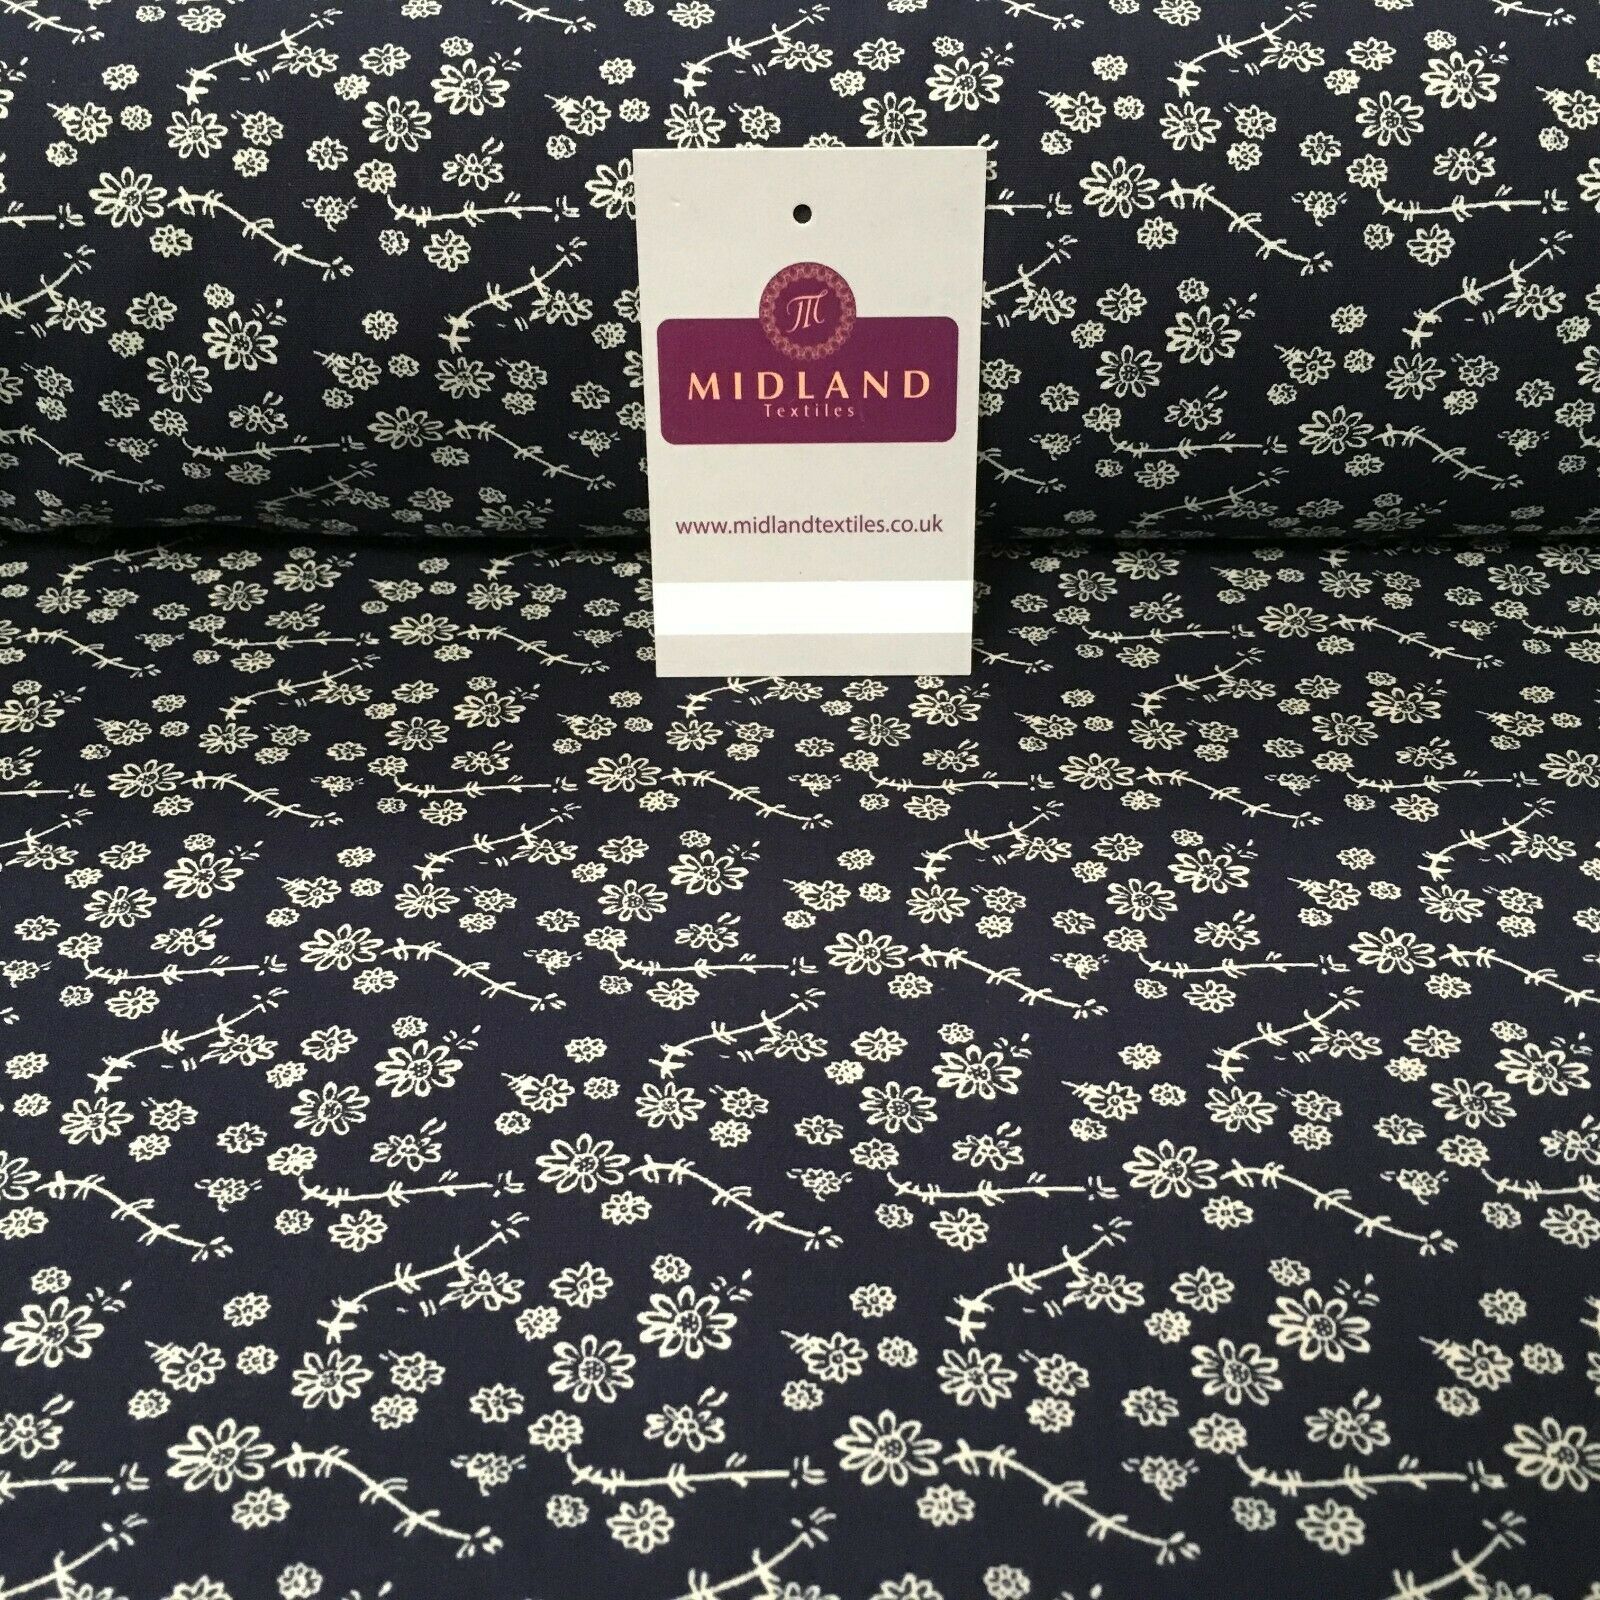 100% Cotton Small Floral Printed Dress Fabric 150cm wide MA1079 Mtex